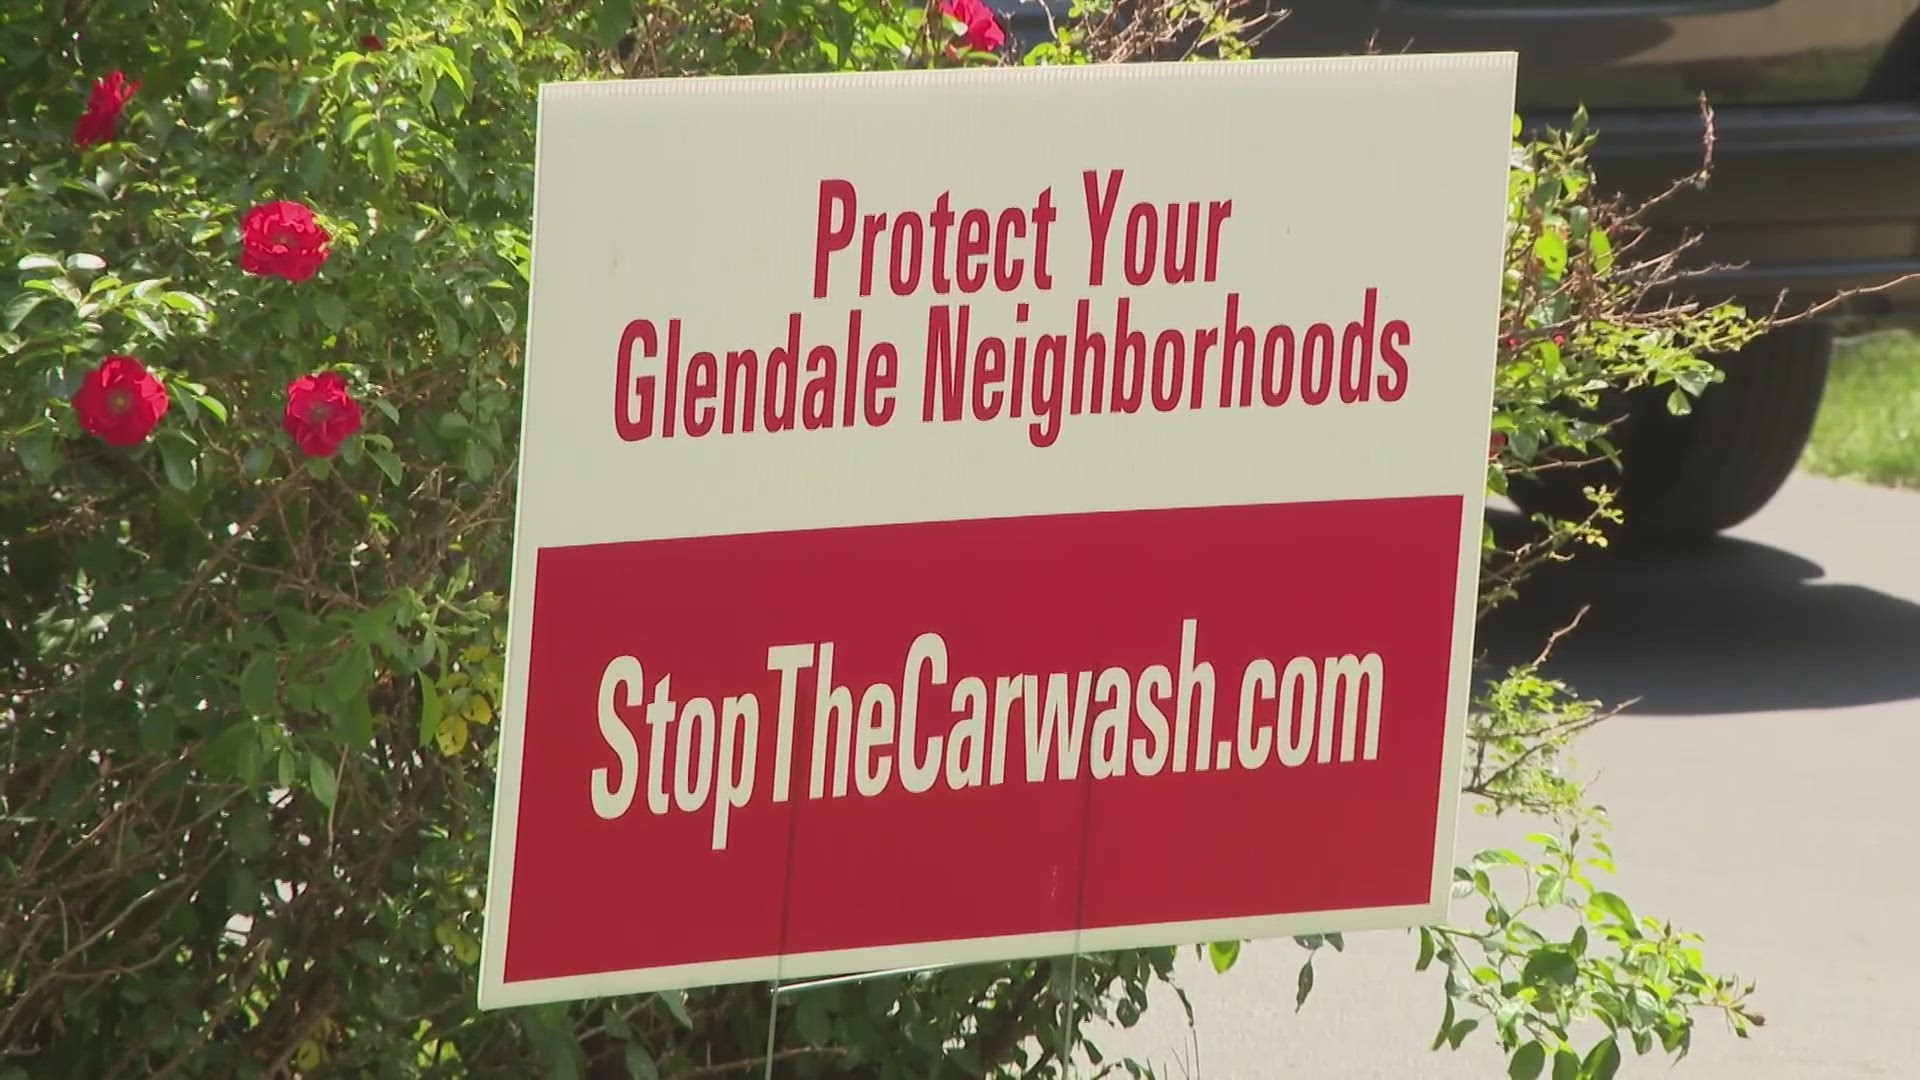 Some Glendale residents are pushing back against plans for a car wash in their neighborhood. They took their concerns to a planning commission meeting at City Hall.